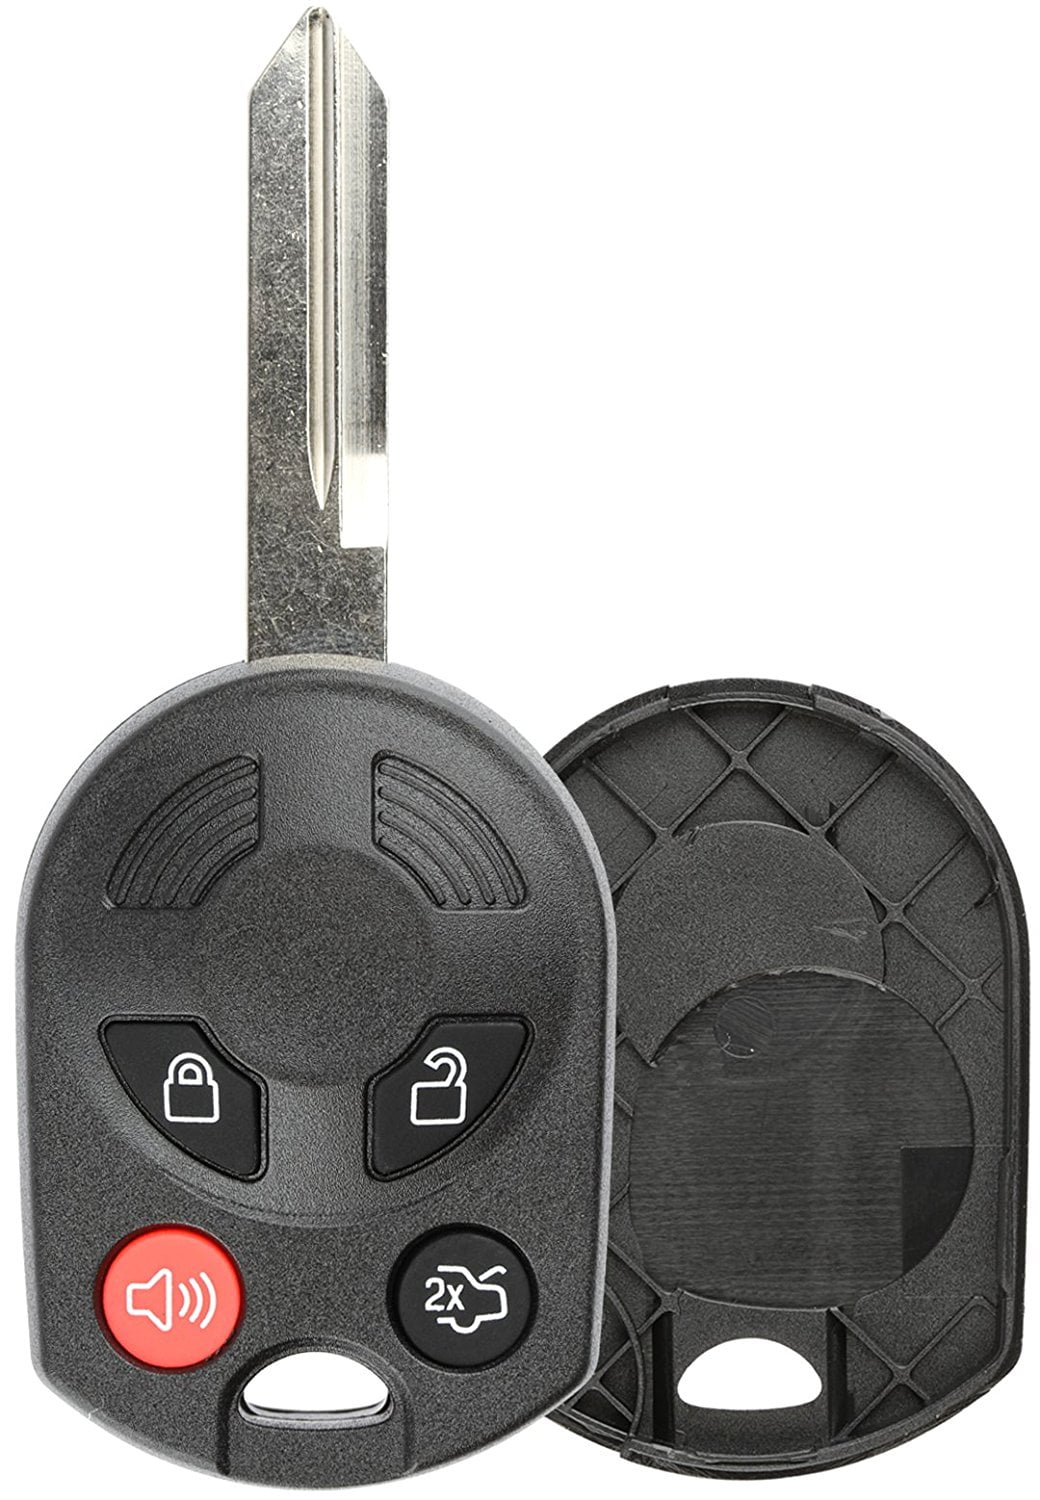 2 For 2006 2007 2008 2009 Ford Crown Victoria Keyless Remote Key Fob OUCD6000022 